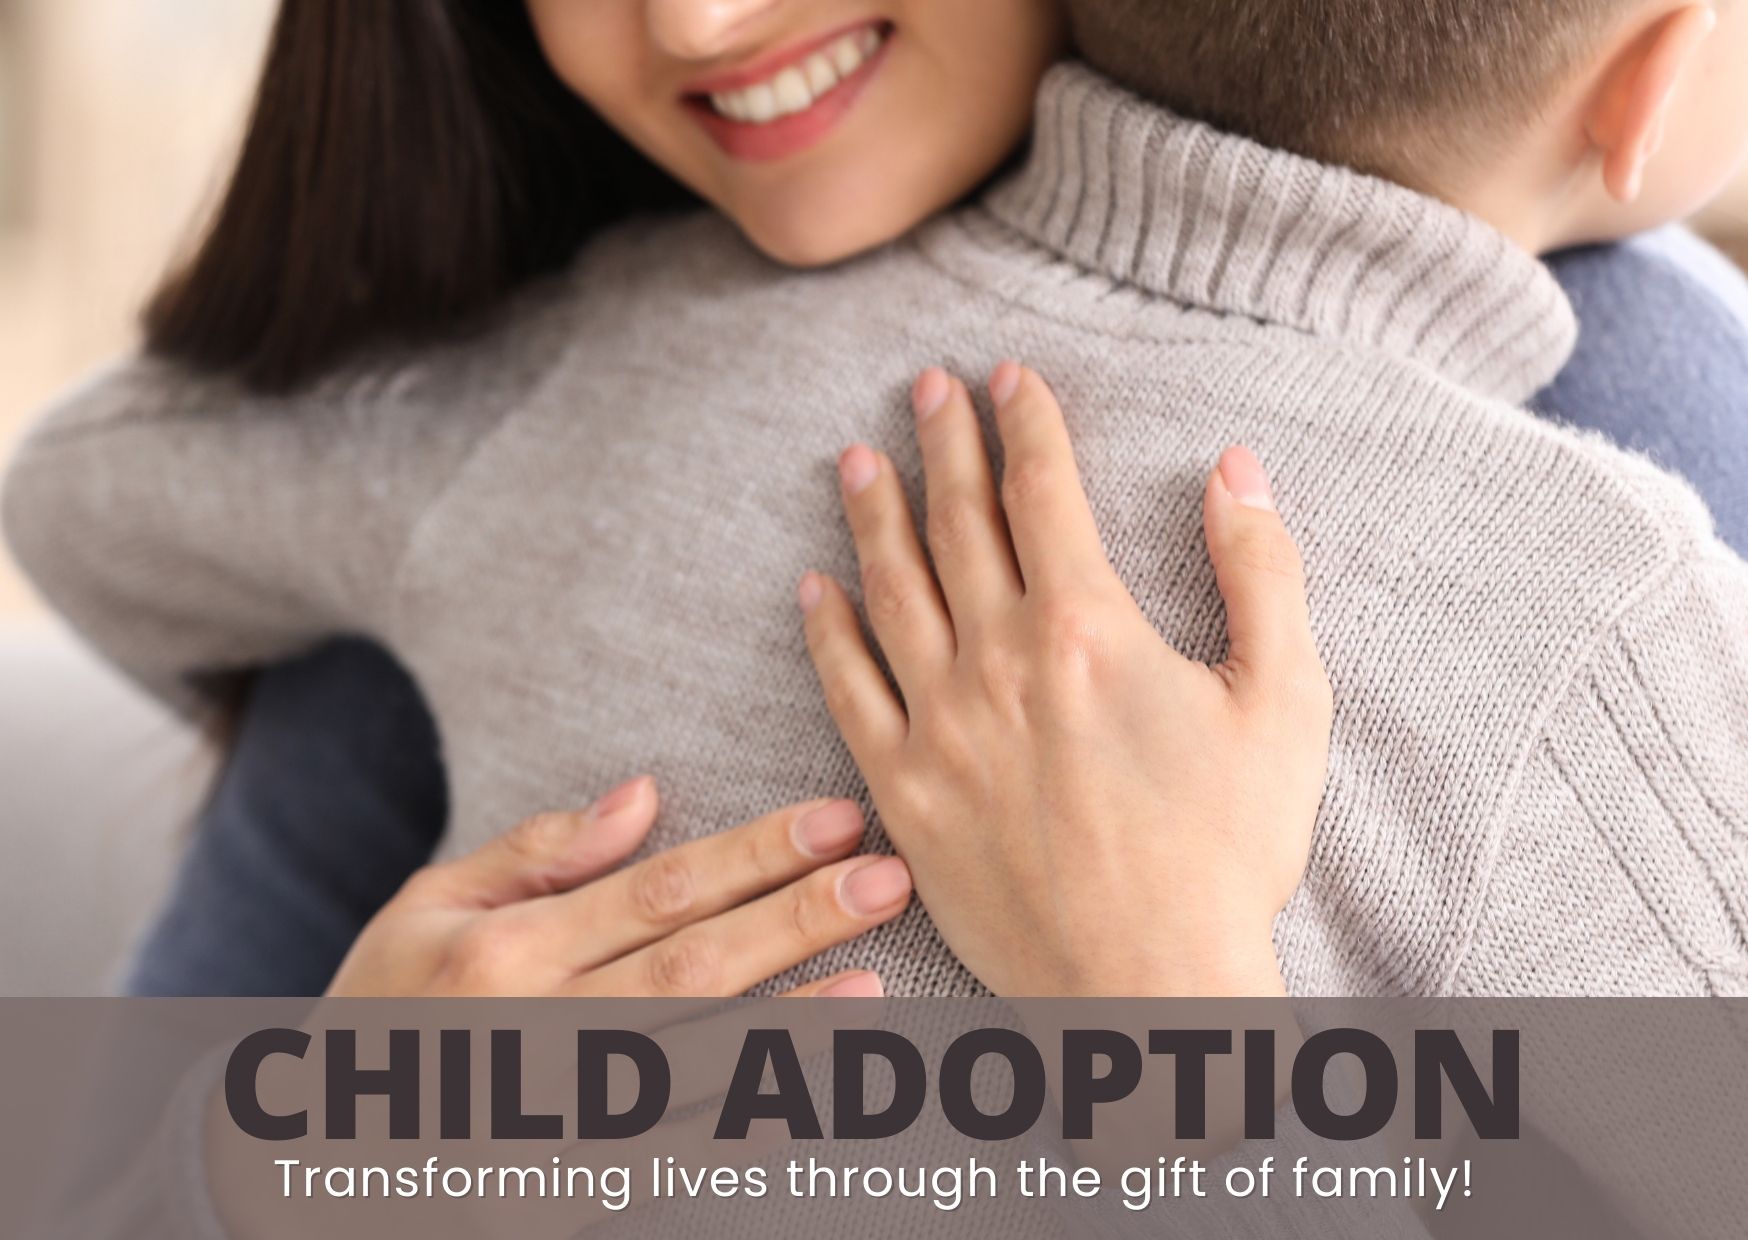 Child Adoption Services in Thailand, transforming lives through the gift of family.